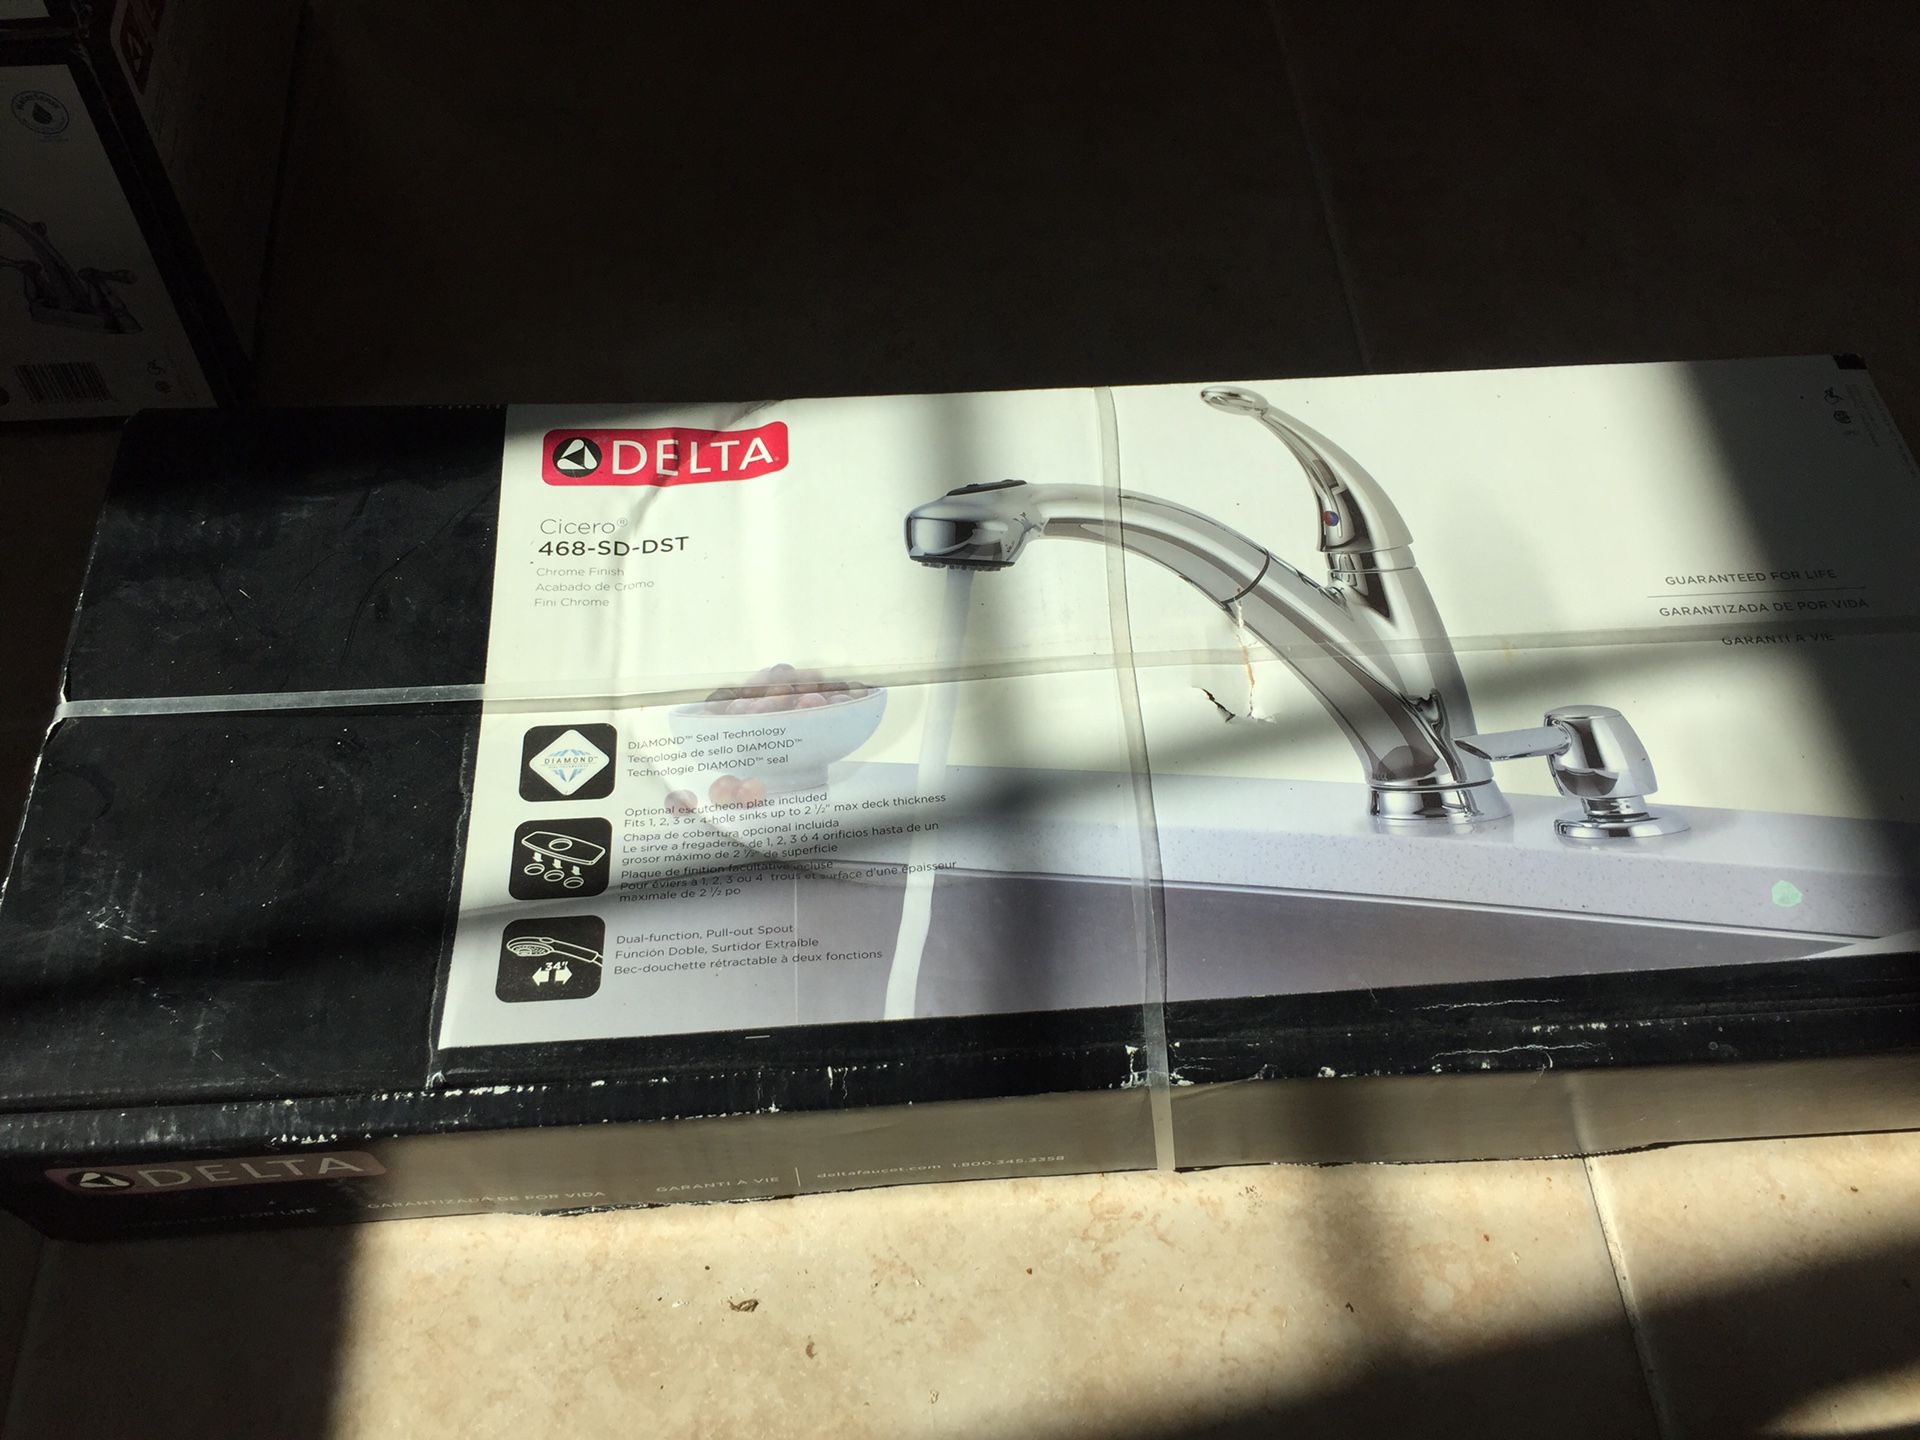 Delta 468-sd-dst Cicero single handle pull-out kitchen faucet with soap dispenser BRAND NEW